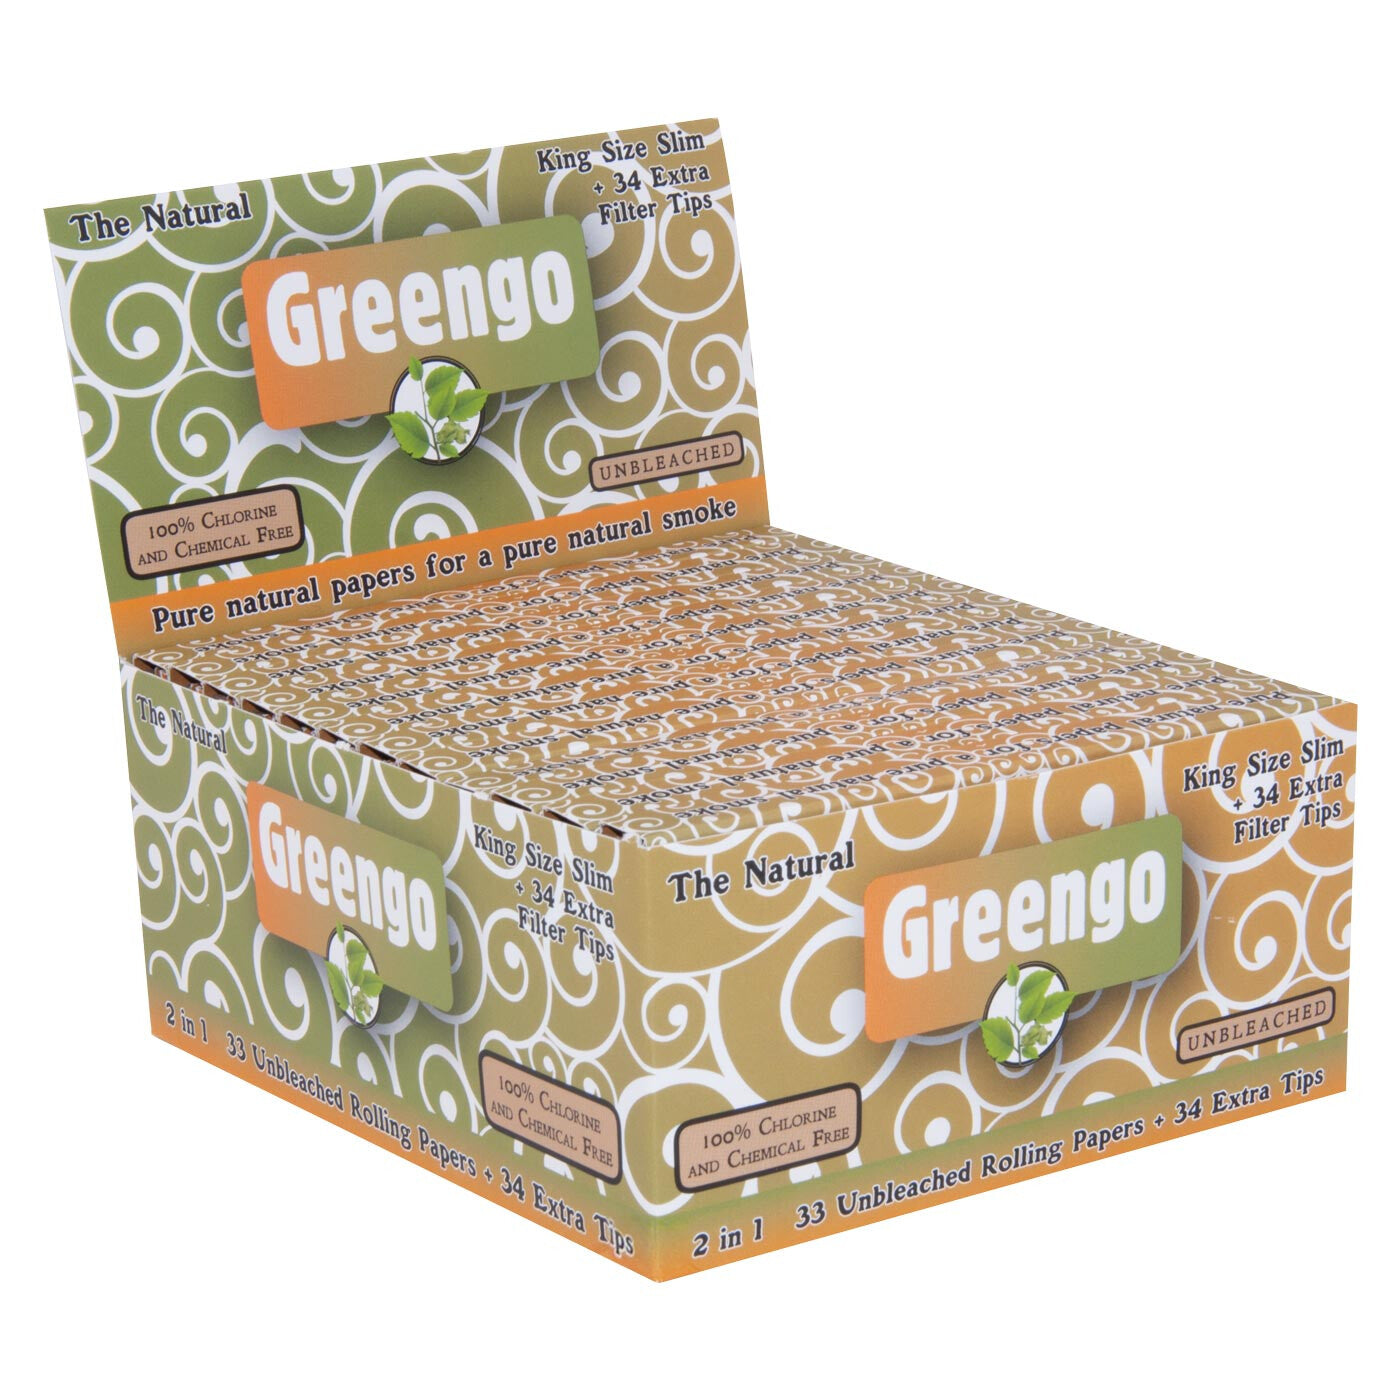 Display Greengo Unbleached King Size Slim 2 In 1 24 Pcs